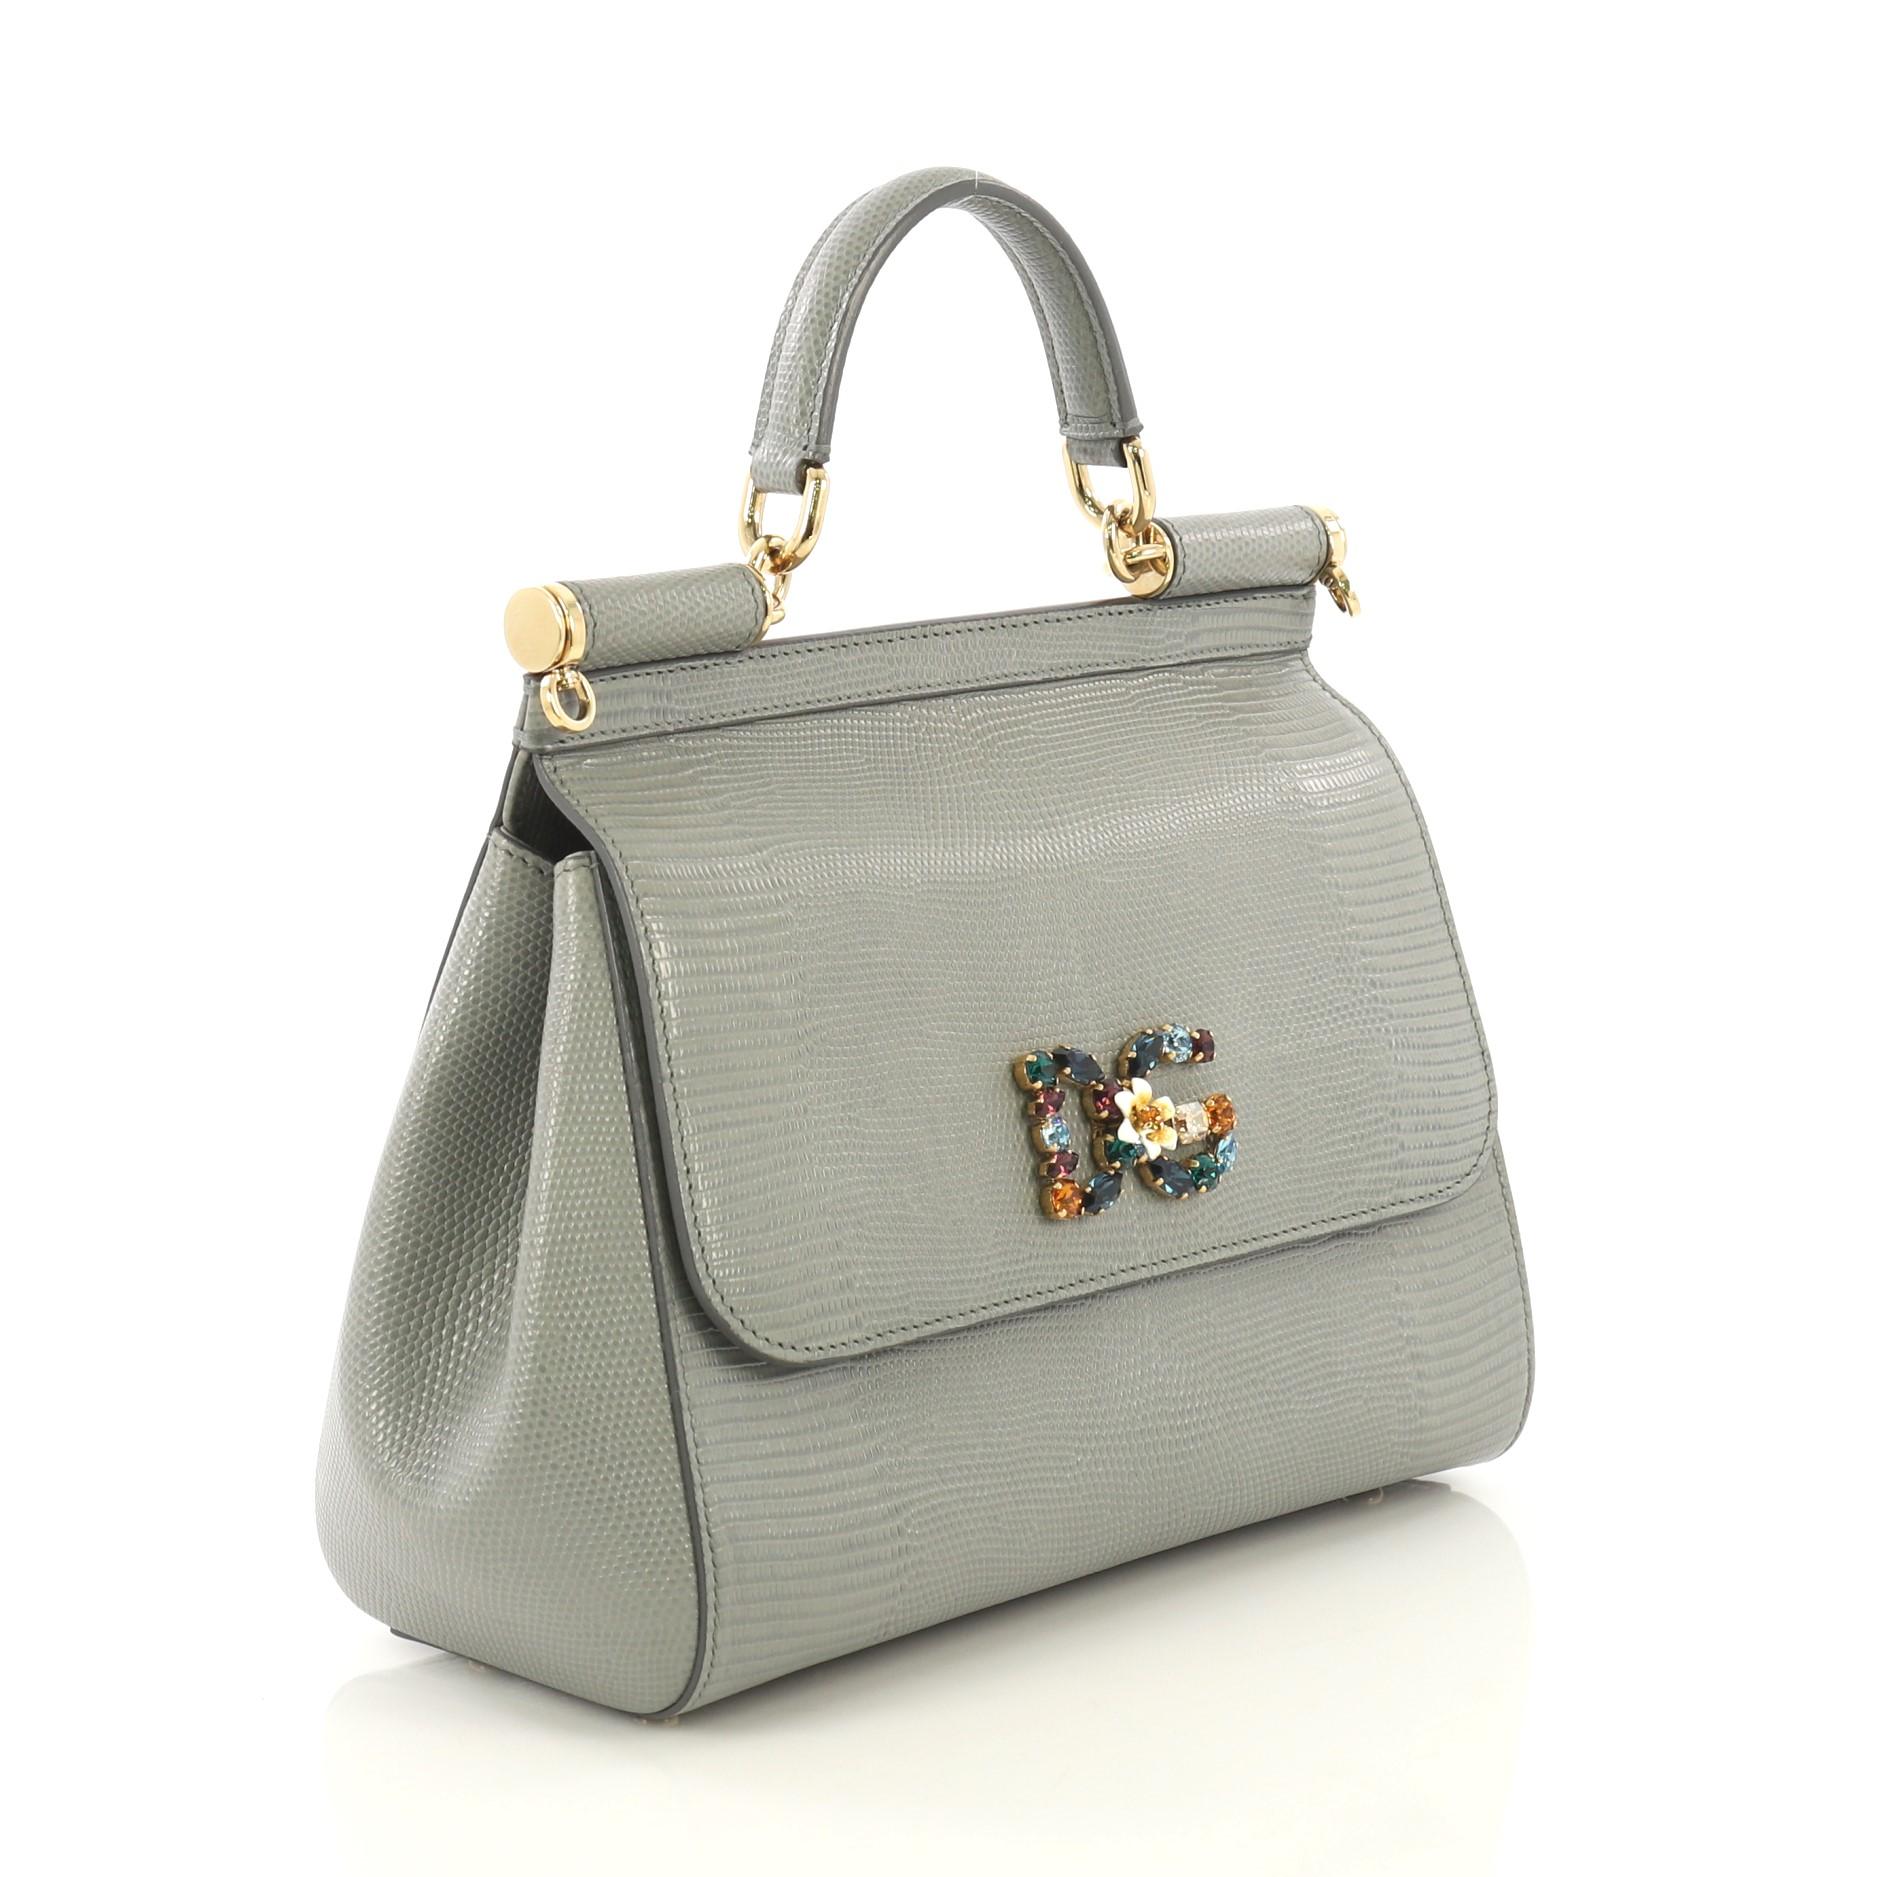 This Dolce & Gabbana Miss Sicily Bag Lizard Embossed Leather Medium, crafted in gray lizard embossed leather, features a leather top handle, framed top flap, and gold-tone hardware. Its magnetic snap closure opens to a brown leopard print fabric